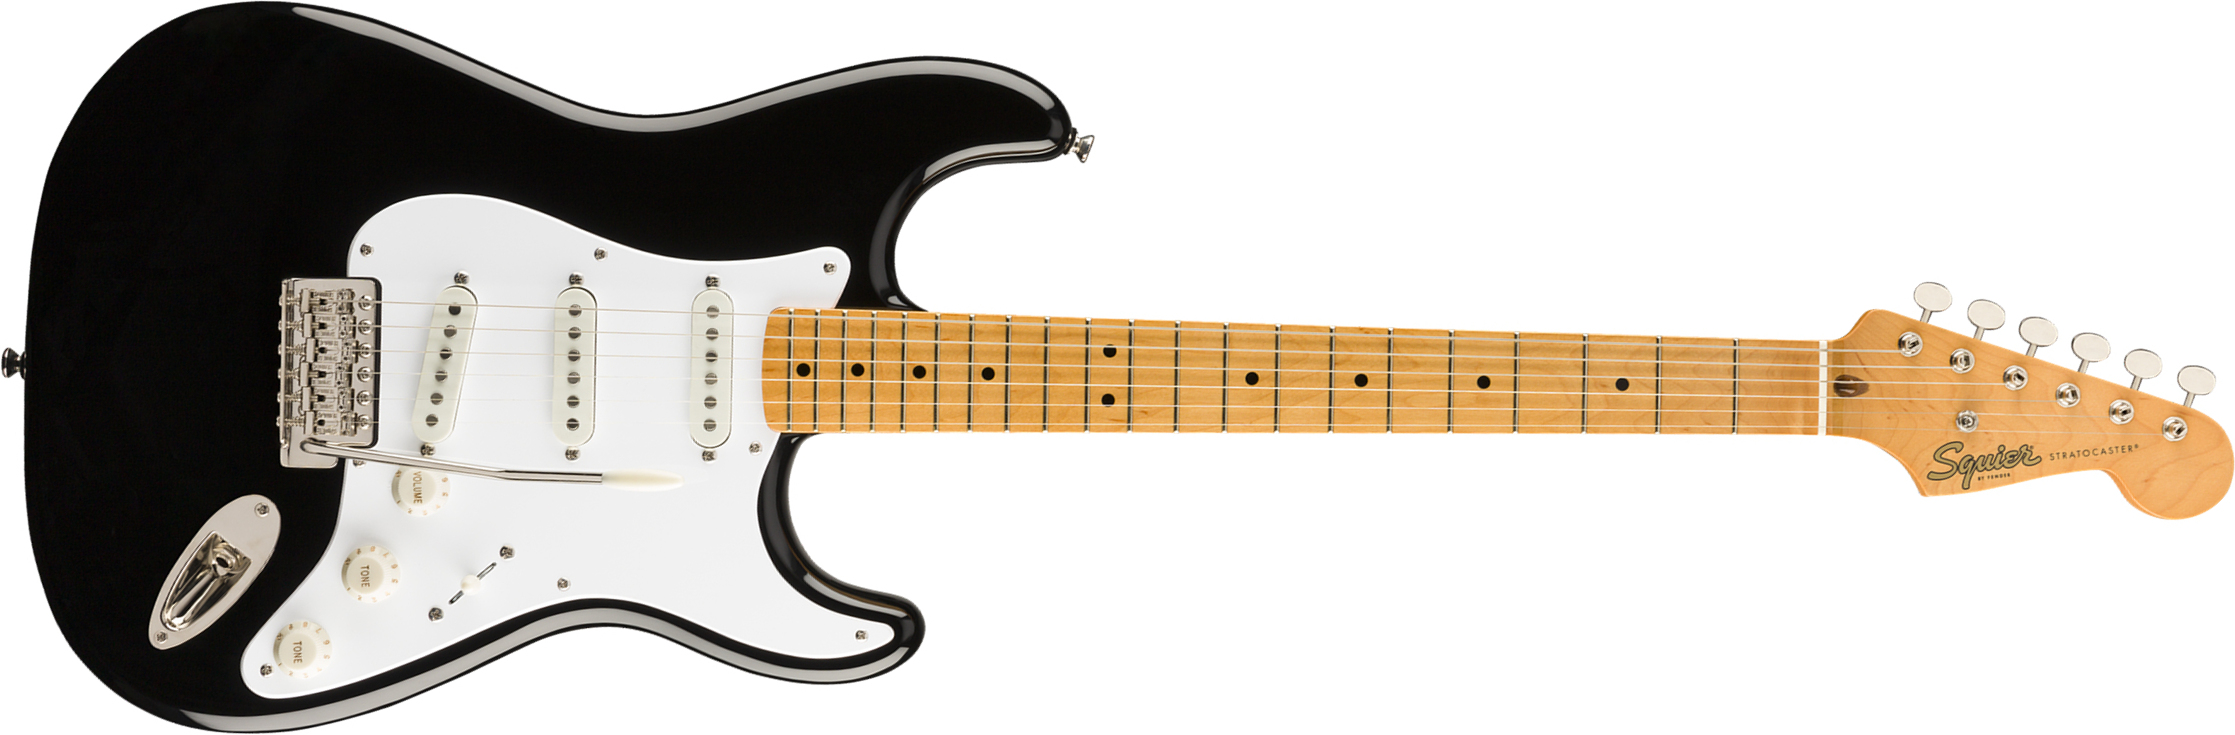 Squier Strat '50s Classic Vibe 2019 Mn 2019 - Black - Str shape electric guitar - Main picture